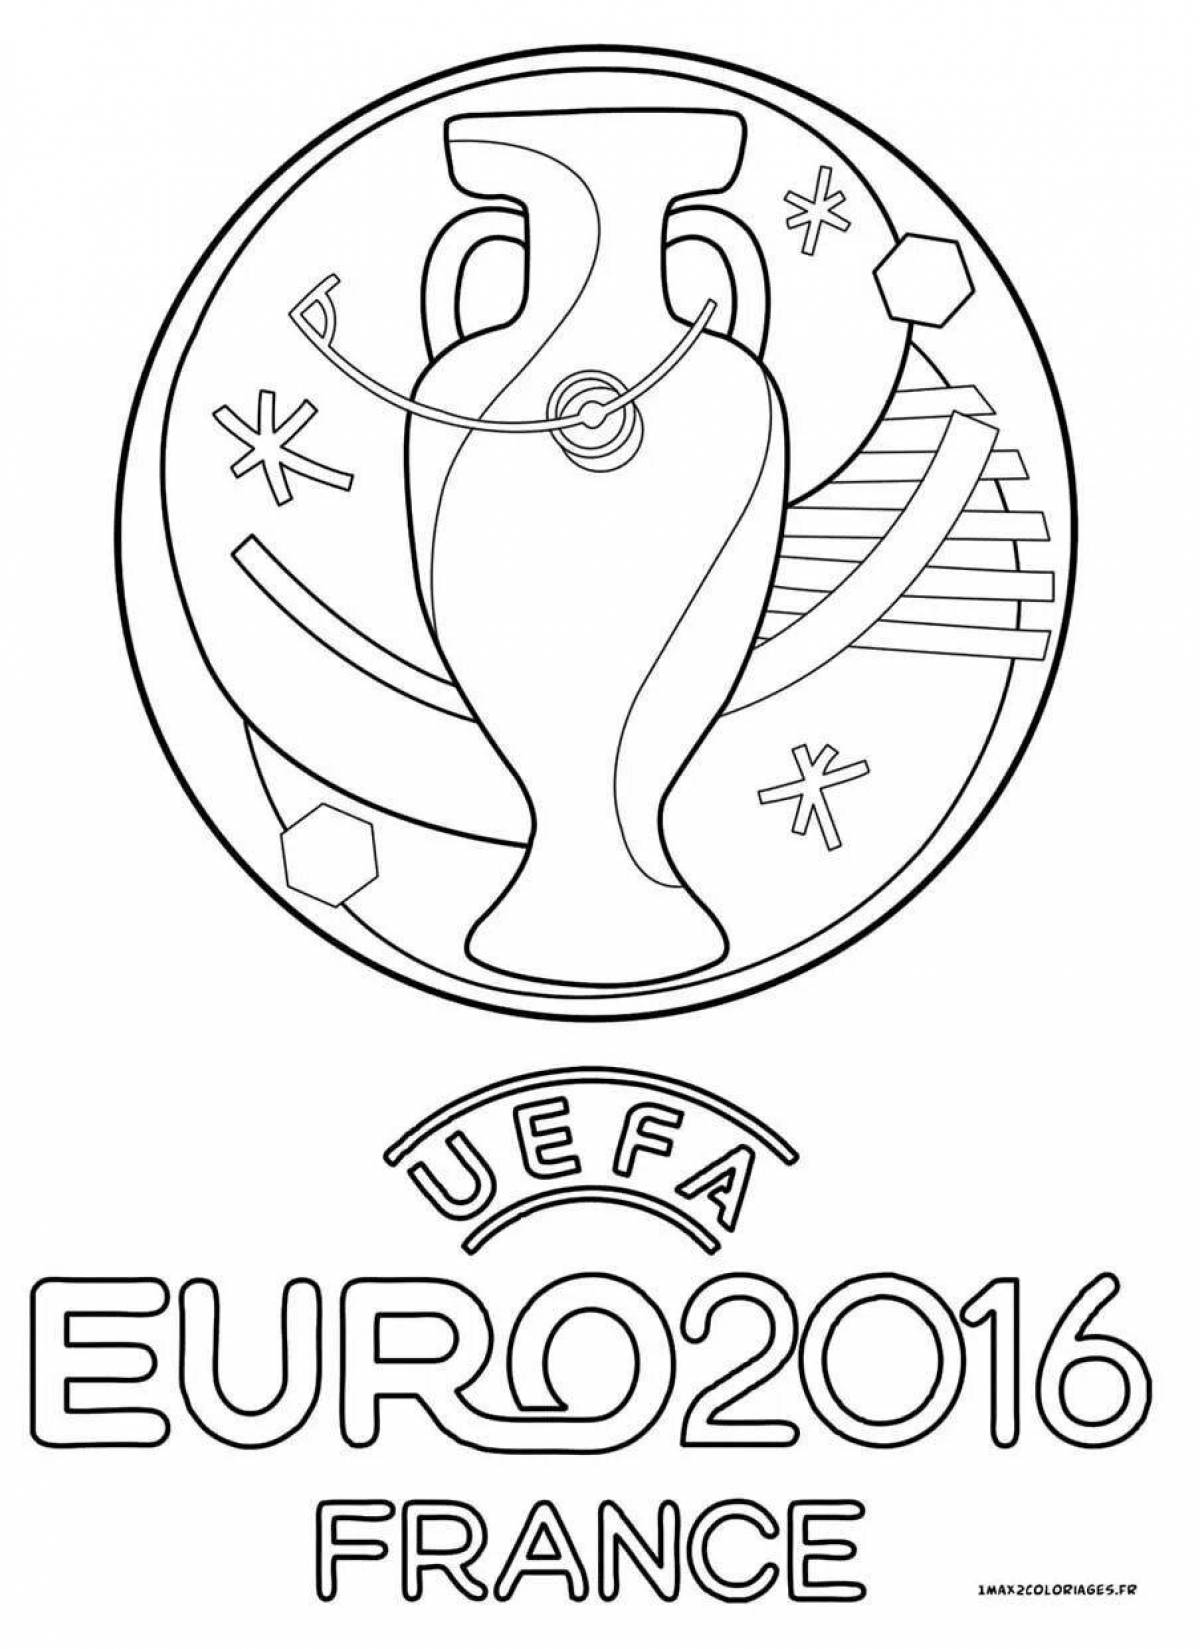 Adorable world cup coloring book